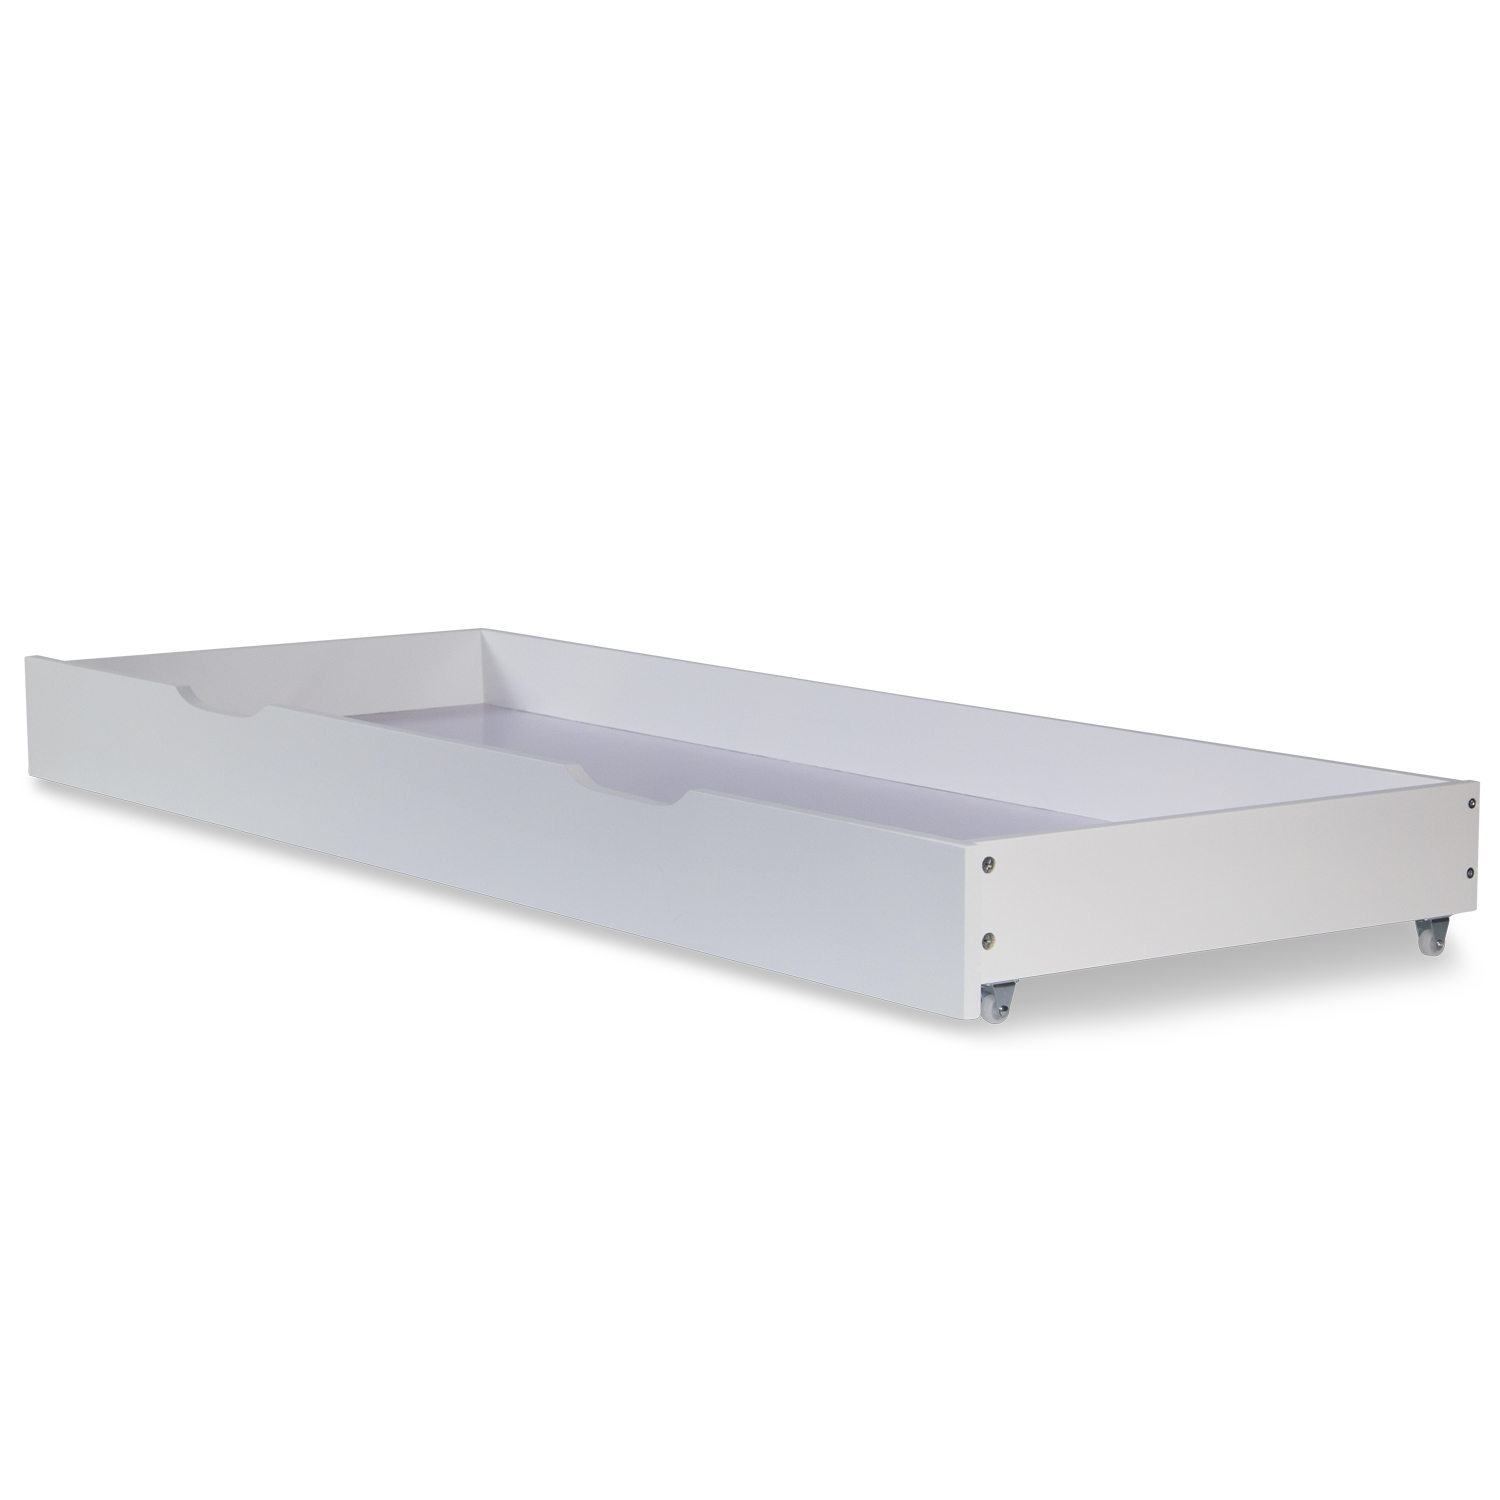 Wooden Bed Drawer Pull-Out Bed Box Storage with Castors White